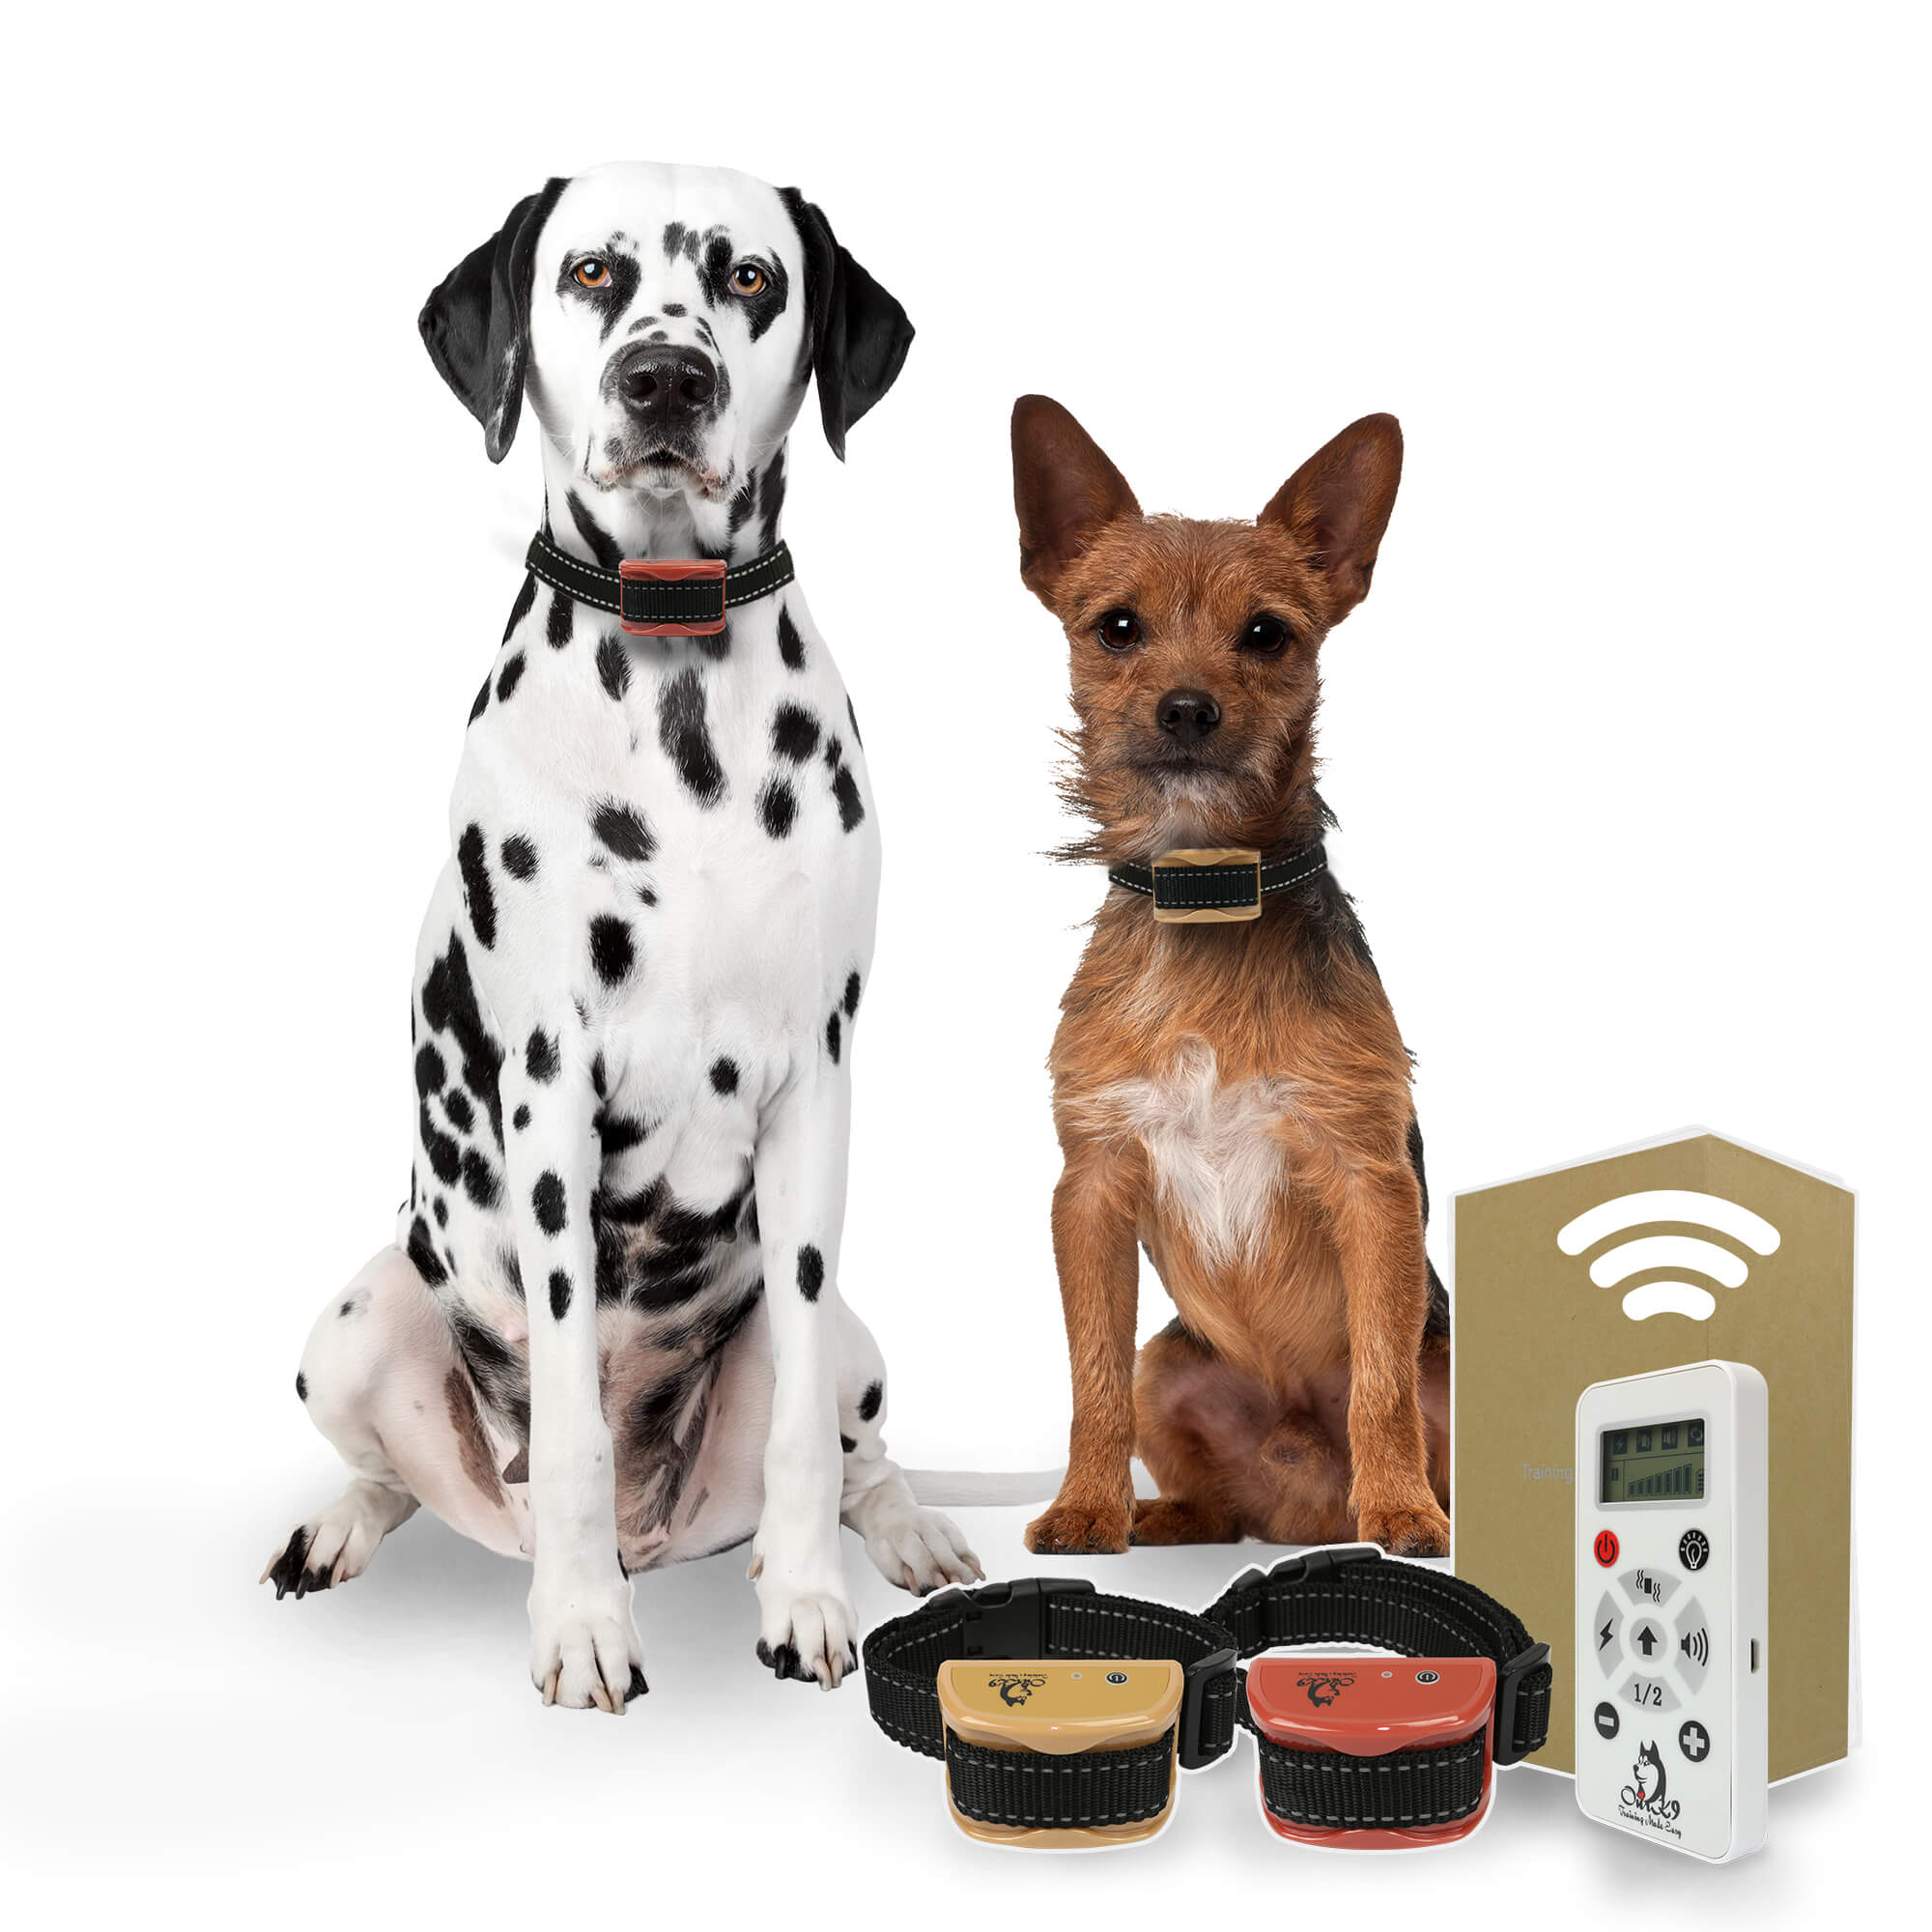 Rechargeable Remote Dog Training Collars for Small -Medium sized Dogs